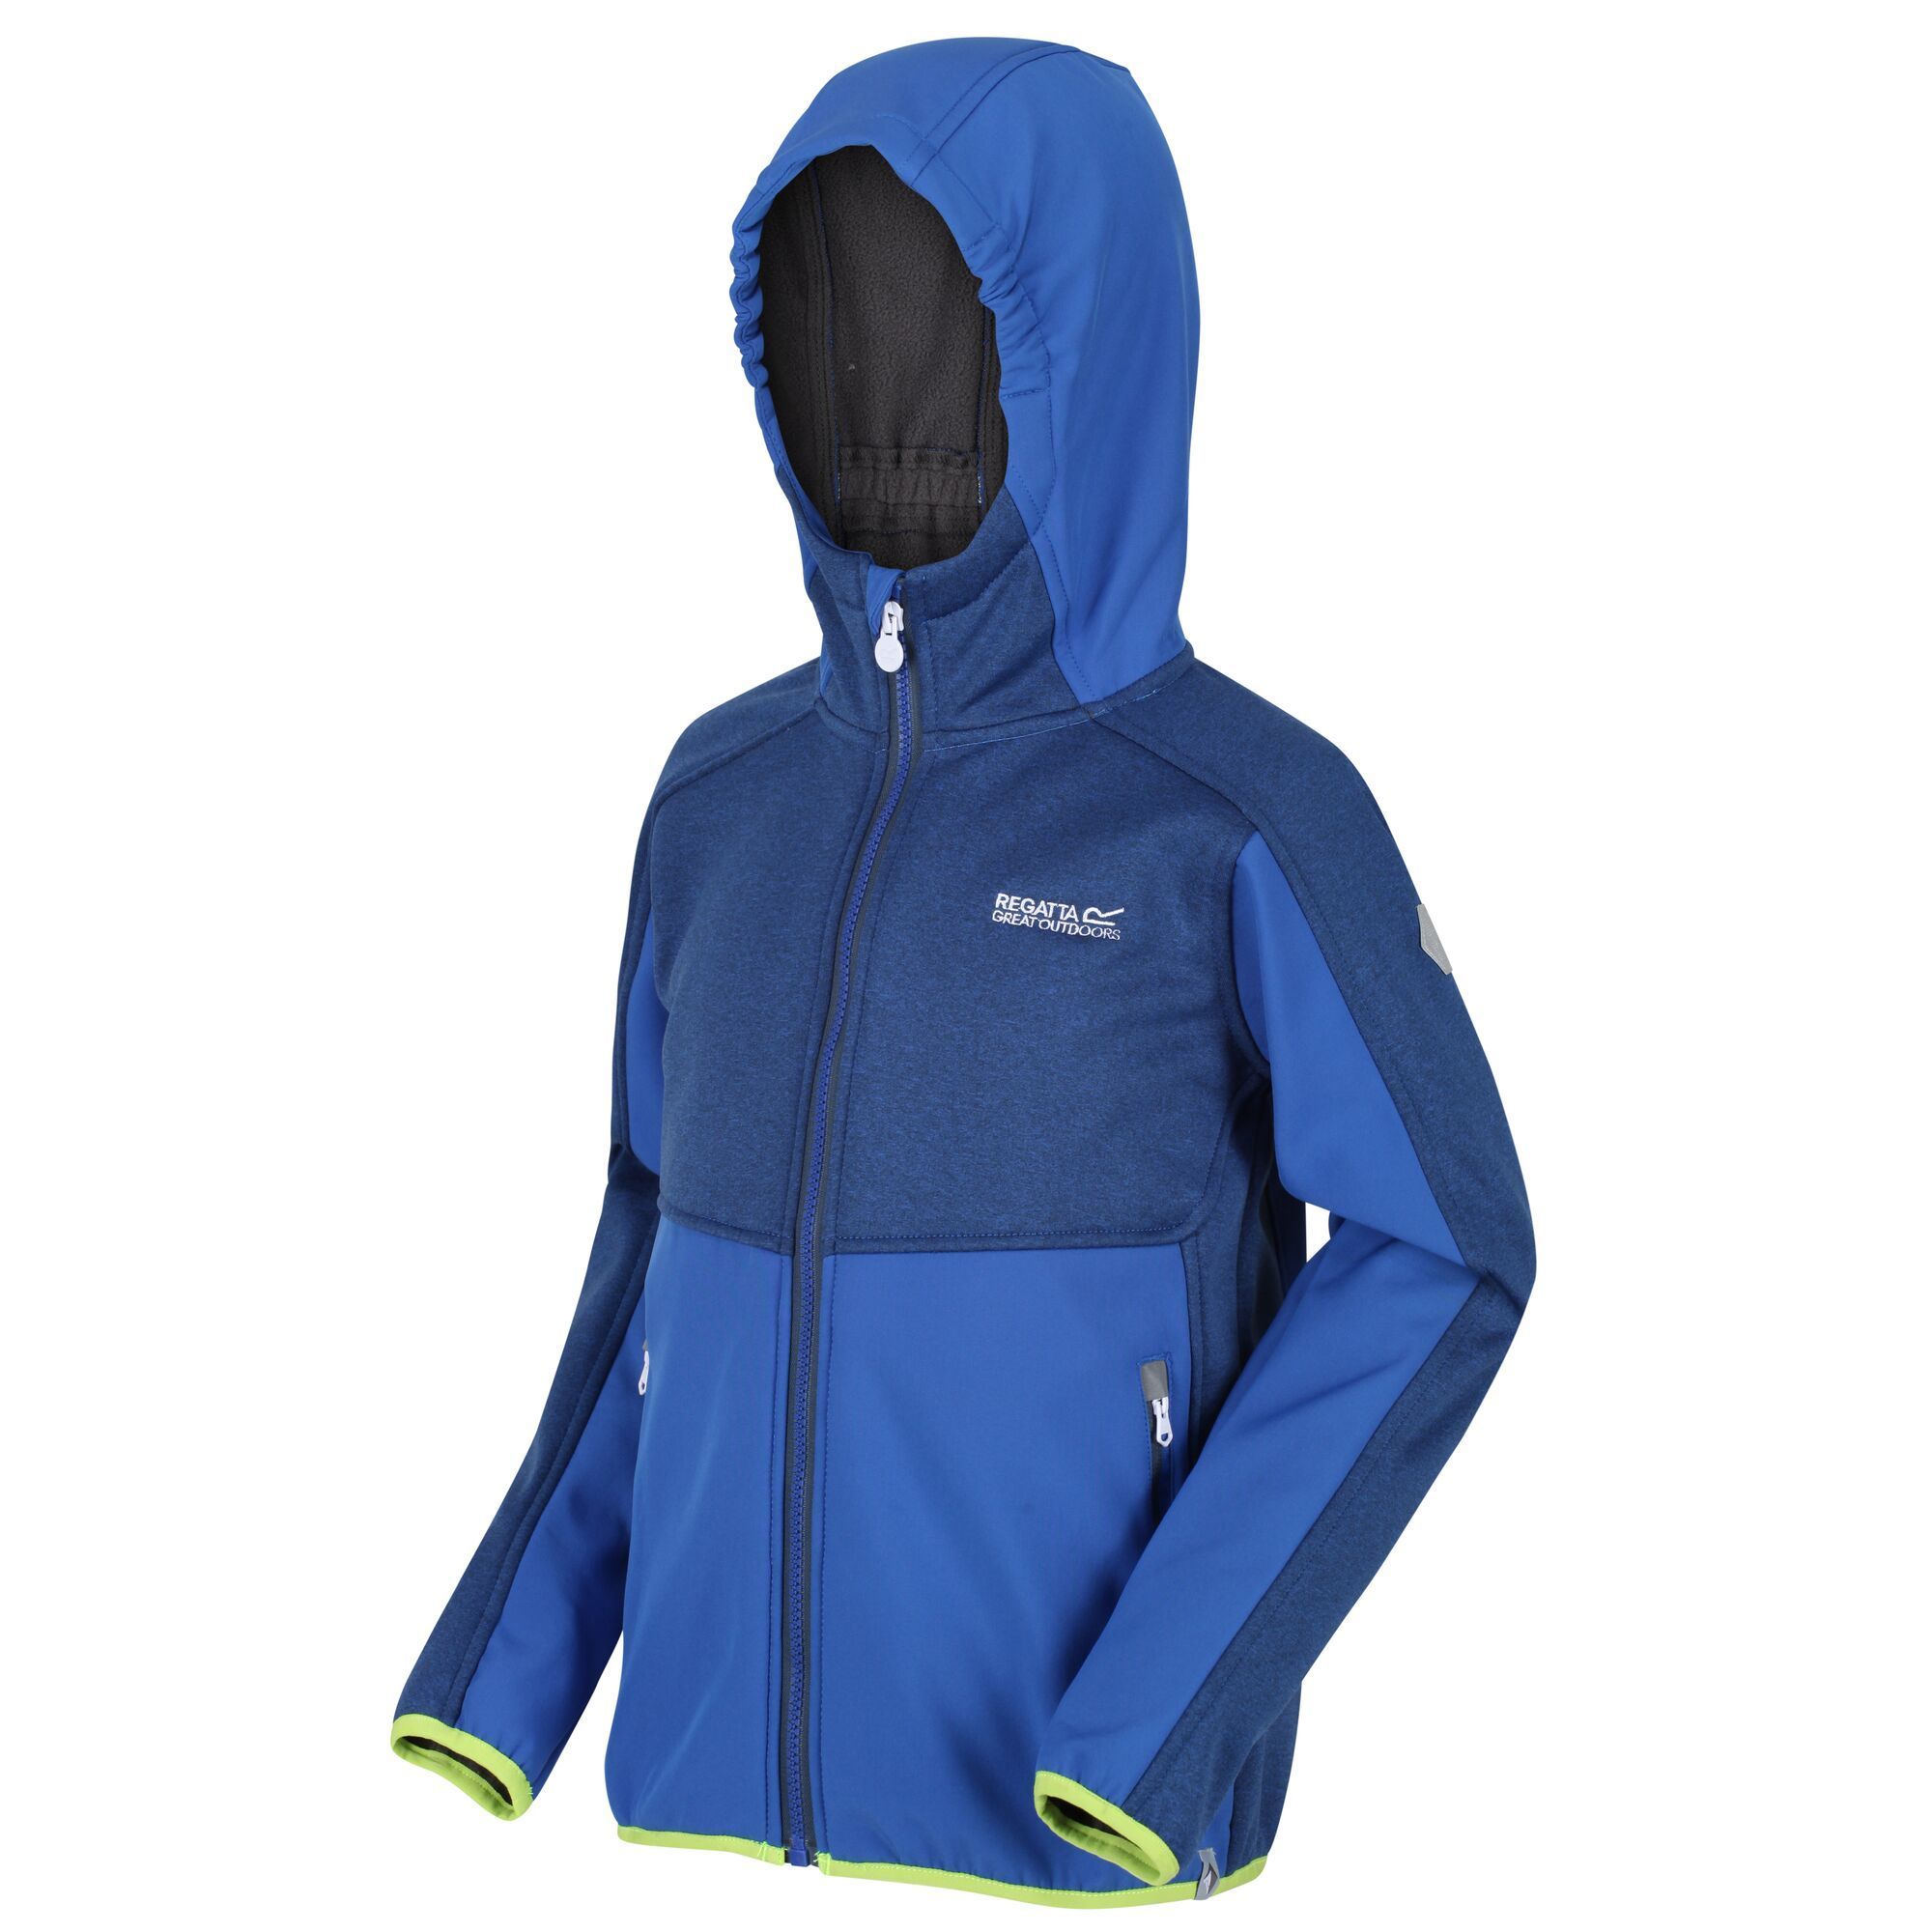 Material: 96% Polyester, 4% Elastane. Durable, water-repellent jacket made from warm backed woven stretch Softshell fabric. Elasticated hood and stretch binding to cuffs and hem. 2 zipped lower pockets. Regatta outdoors logo badge on the sleeve.